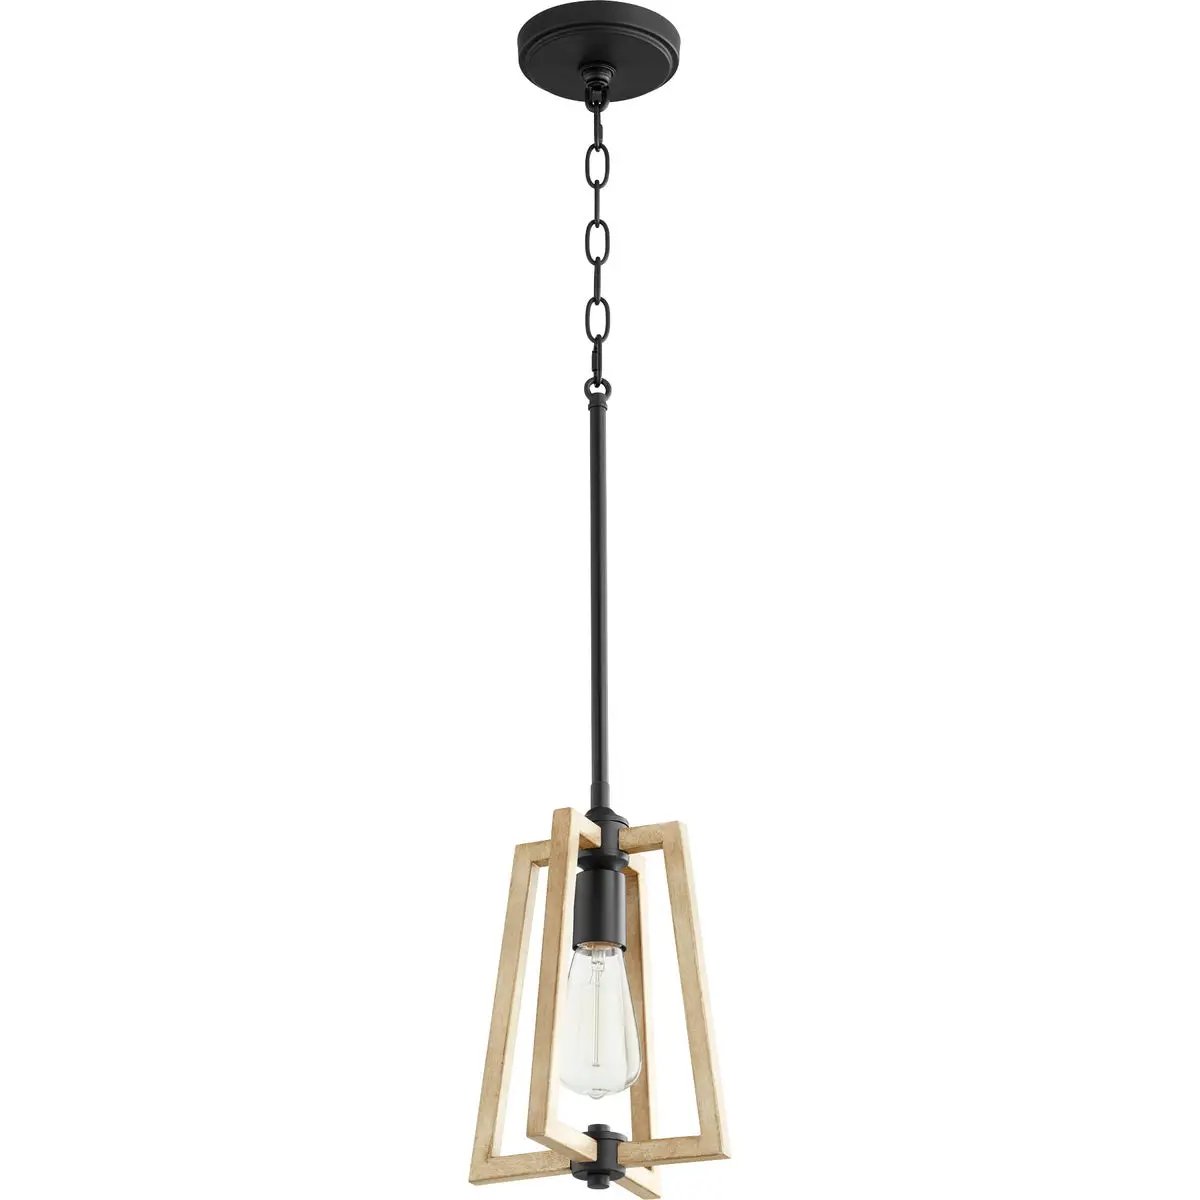 Modern Farmhouse Pendant Light with wood and metal frame, perfect for rustic style. Open-framed design, geometric shape. 100W, 1 bulb, dimmable. 8"W x 12"H. UL Listed, Dry Location. 2-year warranty.